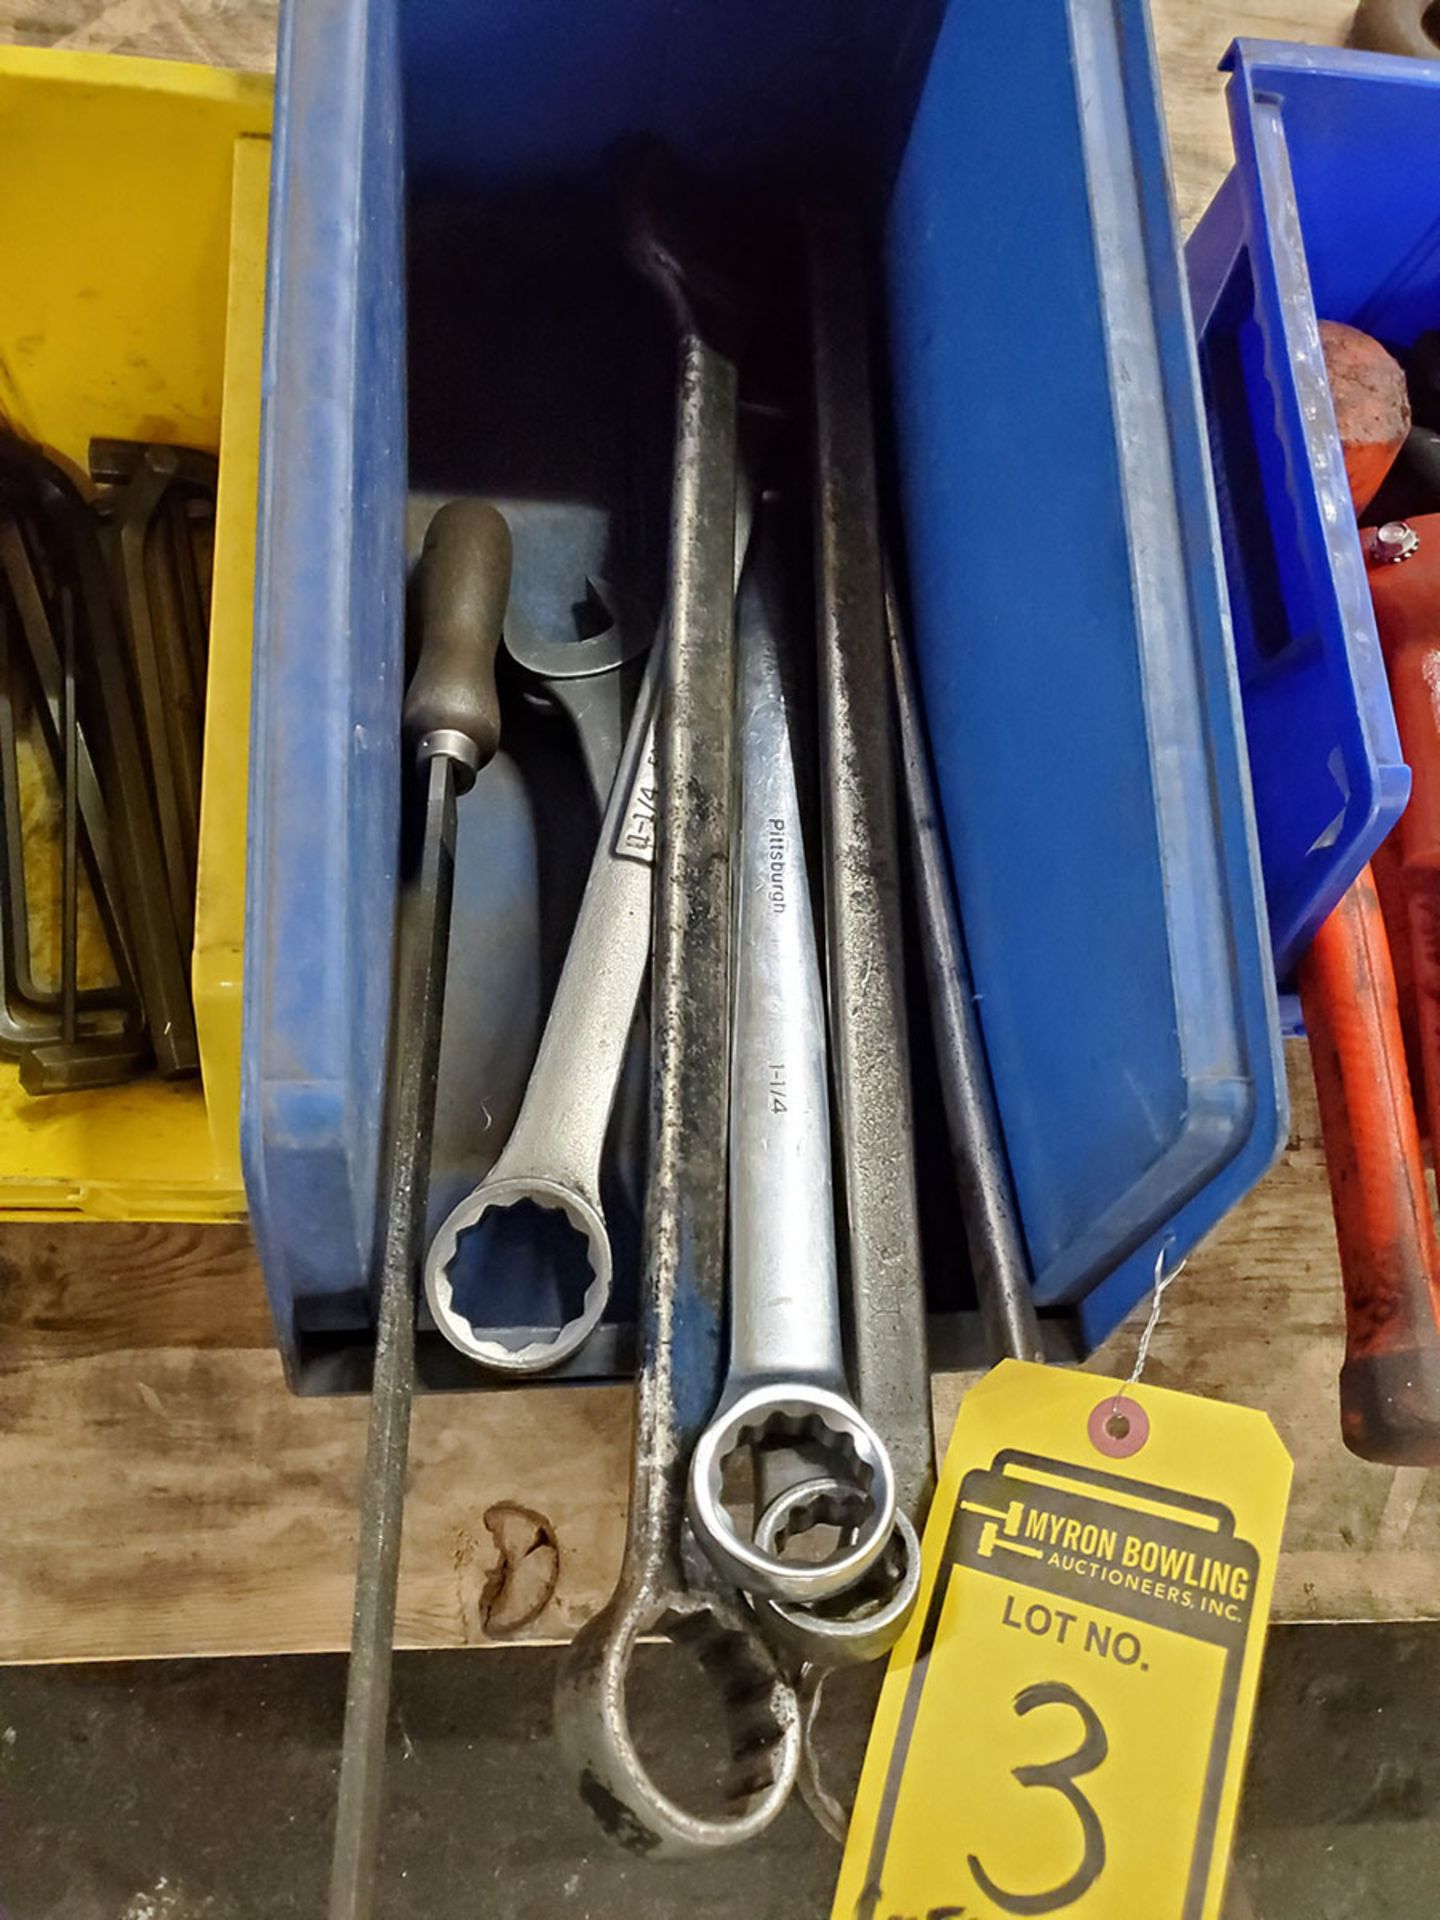 (3) BOXES OF 24’’ CREATOLOGY CRESCENT WRENCH, ALLEN WRENCHES, RUBBER MALLETS, OPEN/CLOSED END - Image 3 of 10